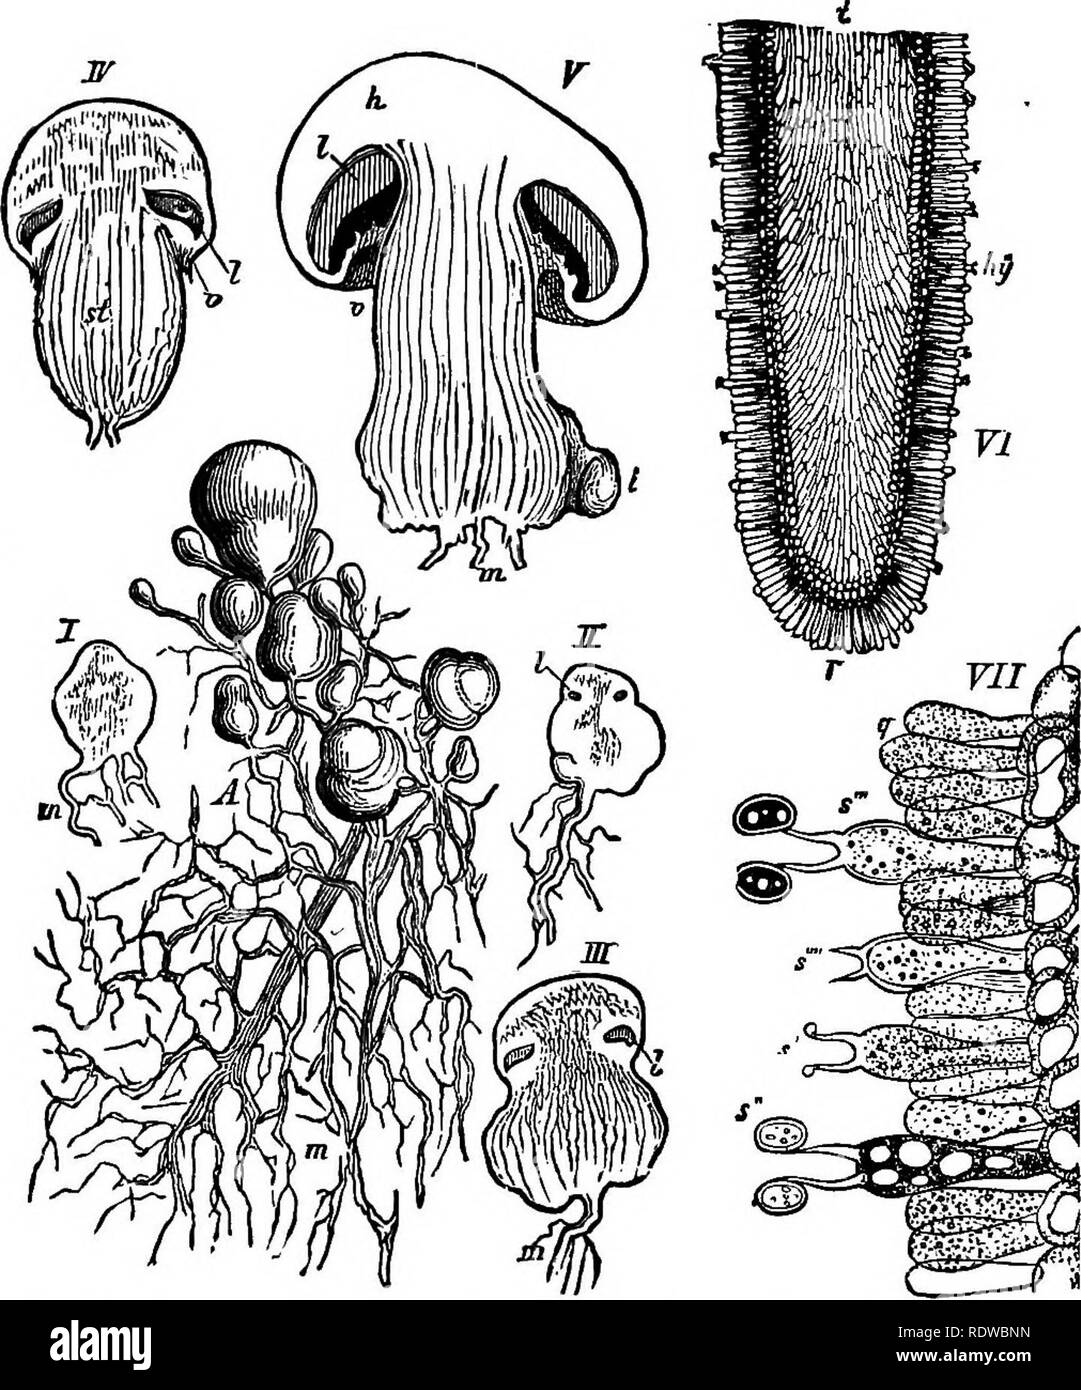 Nature and development of plants . The basal portion of the sporo-phyte  develops into a massive foot, often provided with rhizoidal-like  outgrowths, which serve as a very efficient absorbing organ.The upper  portions